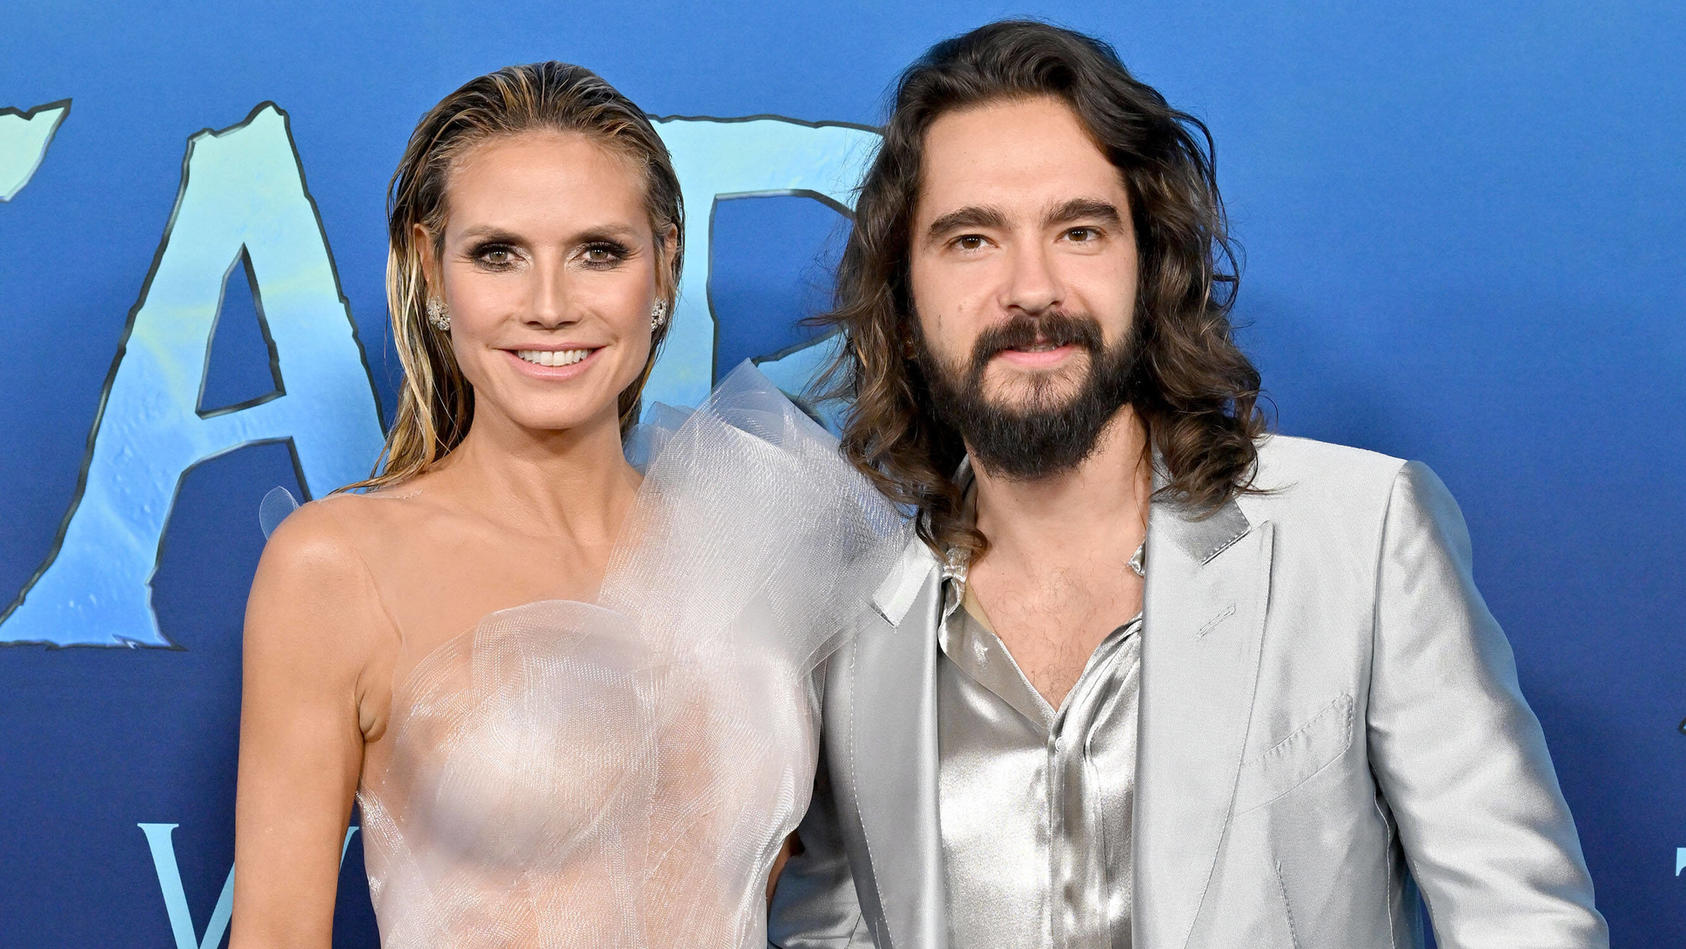  Los Angeles premiere of Avatar: The Way Of Water Featuring: Heidi Klum and Tom Kaulitz Where: Los Angeles, California, United States When: 12 Dec 2022 Credit: BauerGriffin/INSTARimages.com/Cover Images PUBLICATIONxNOTxINxUKxFRA Copyright: xx 5227768